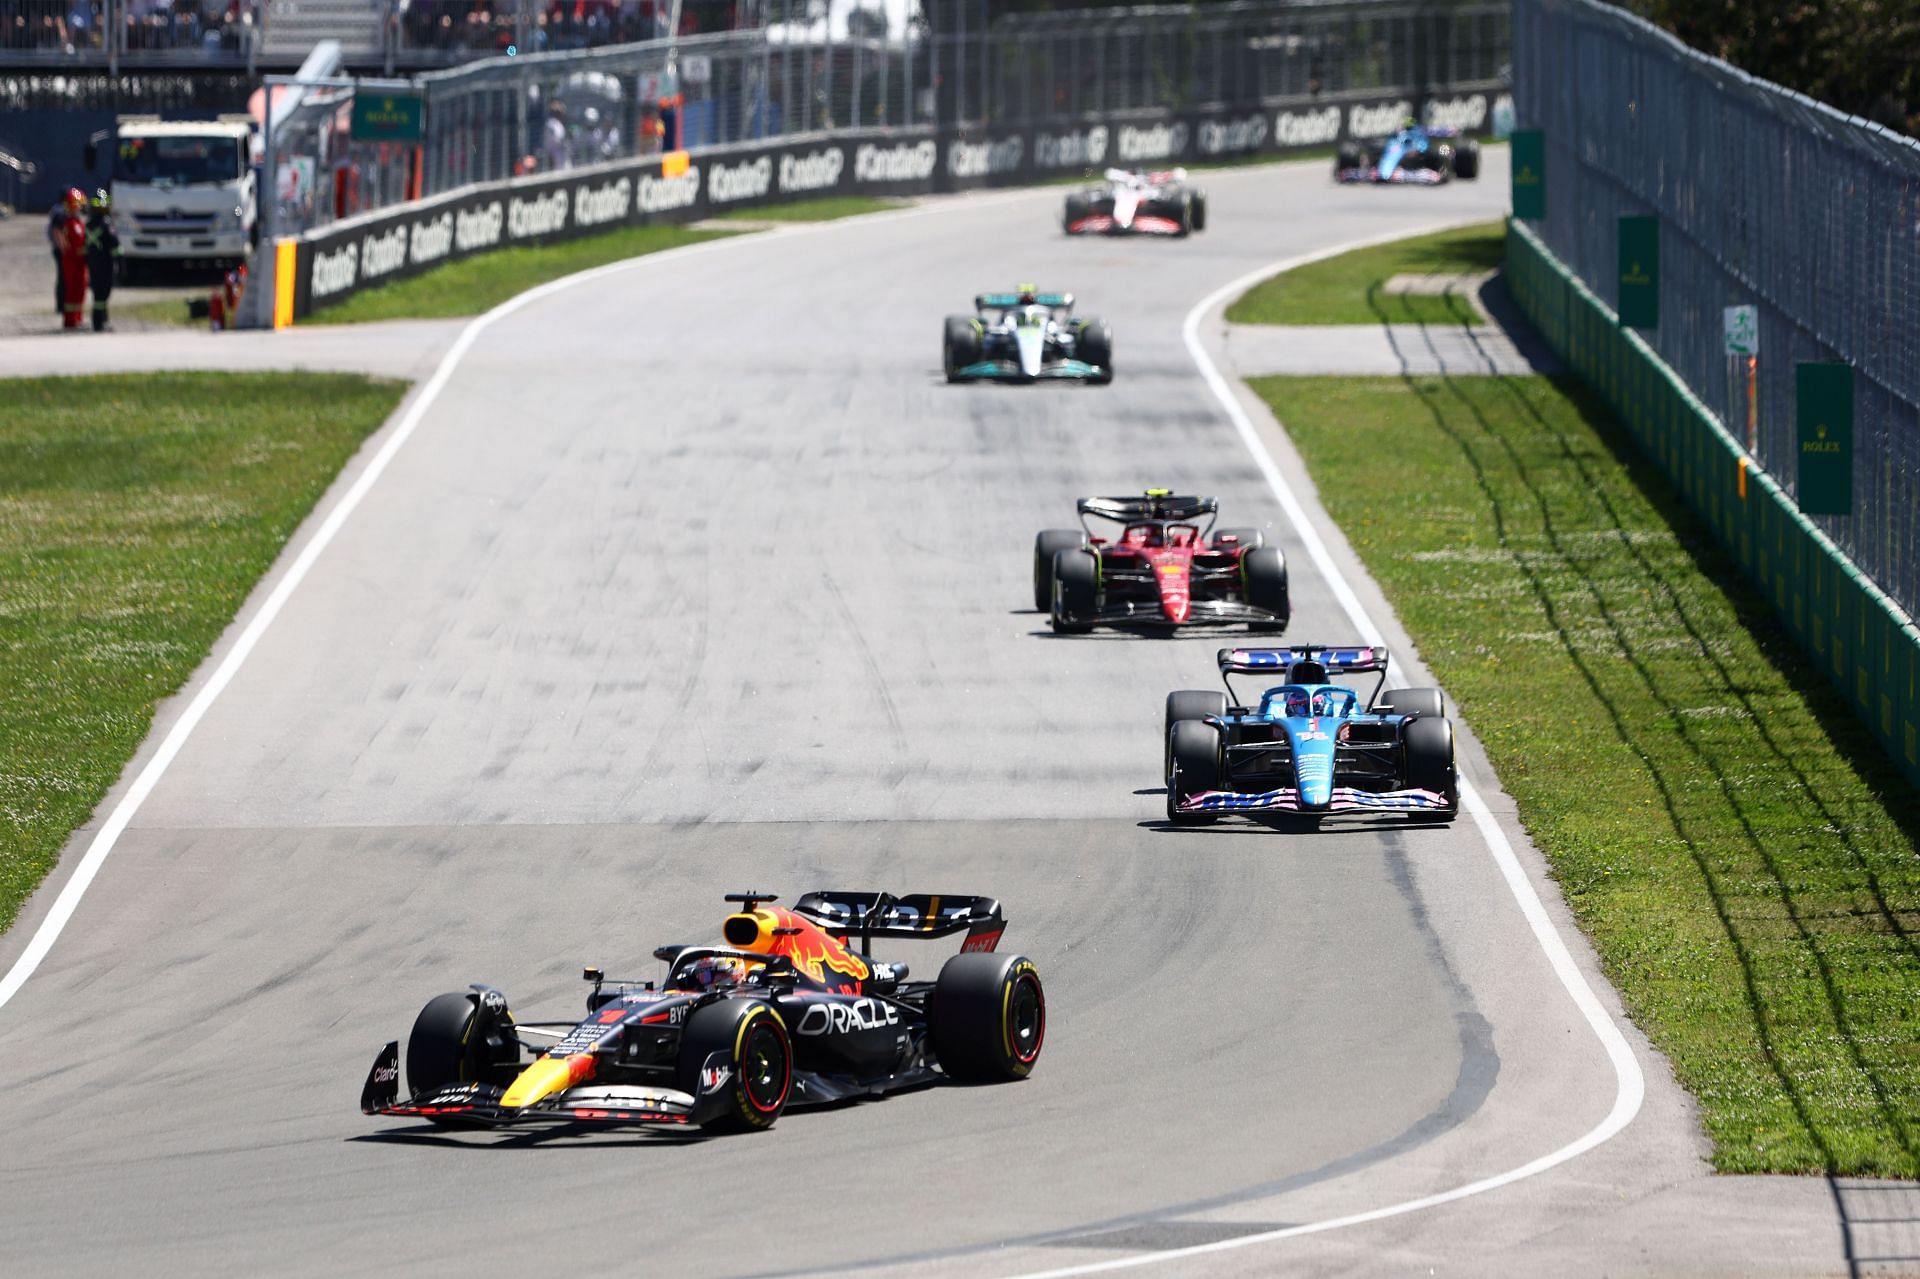 Fernando Alonso hangs onto his second place at the Canadian Grand Prix